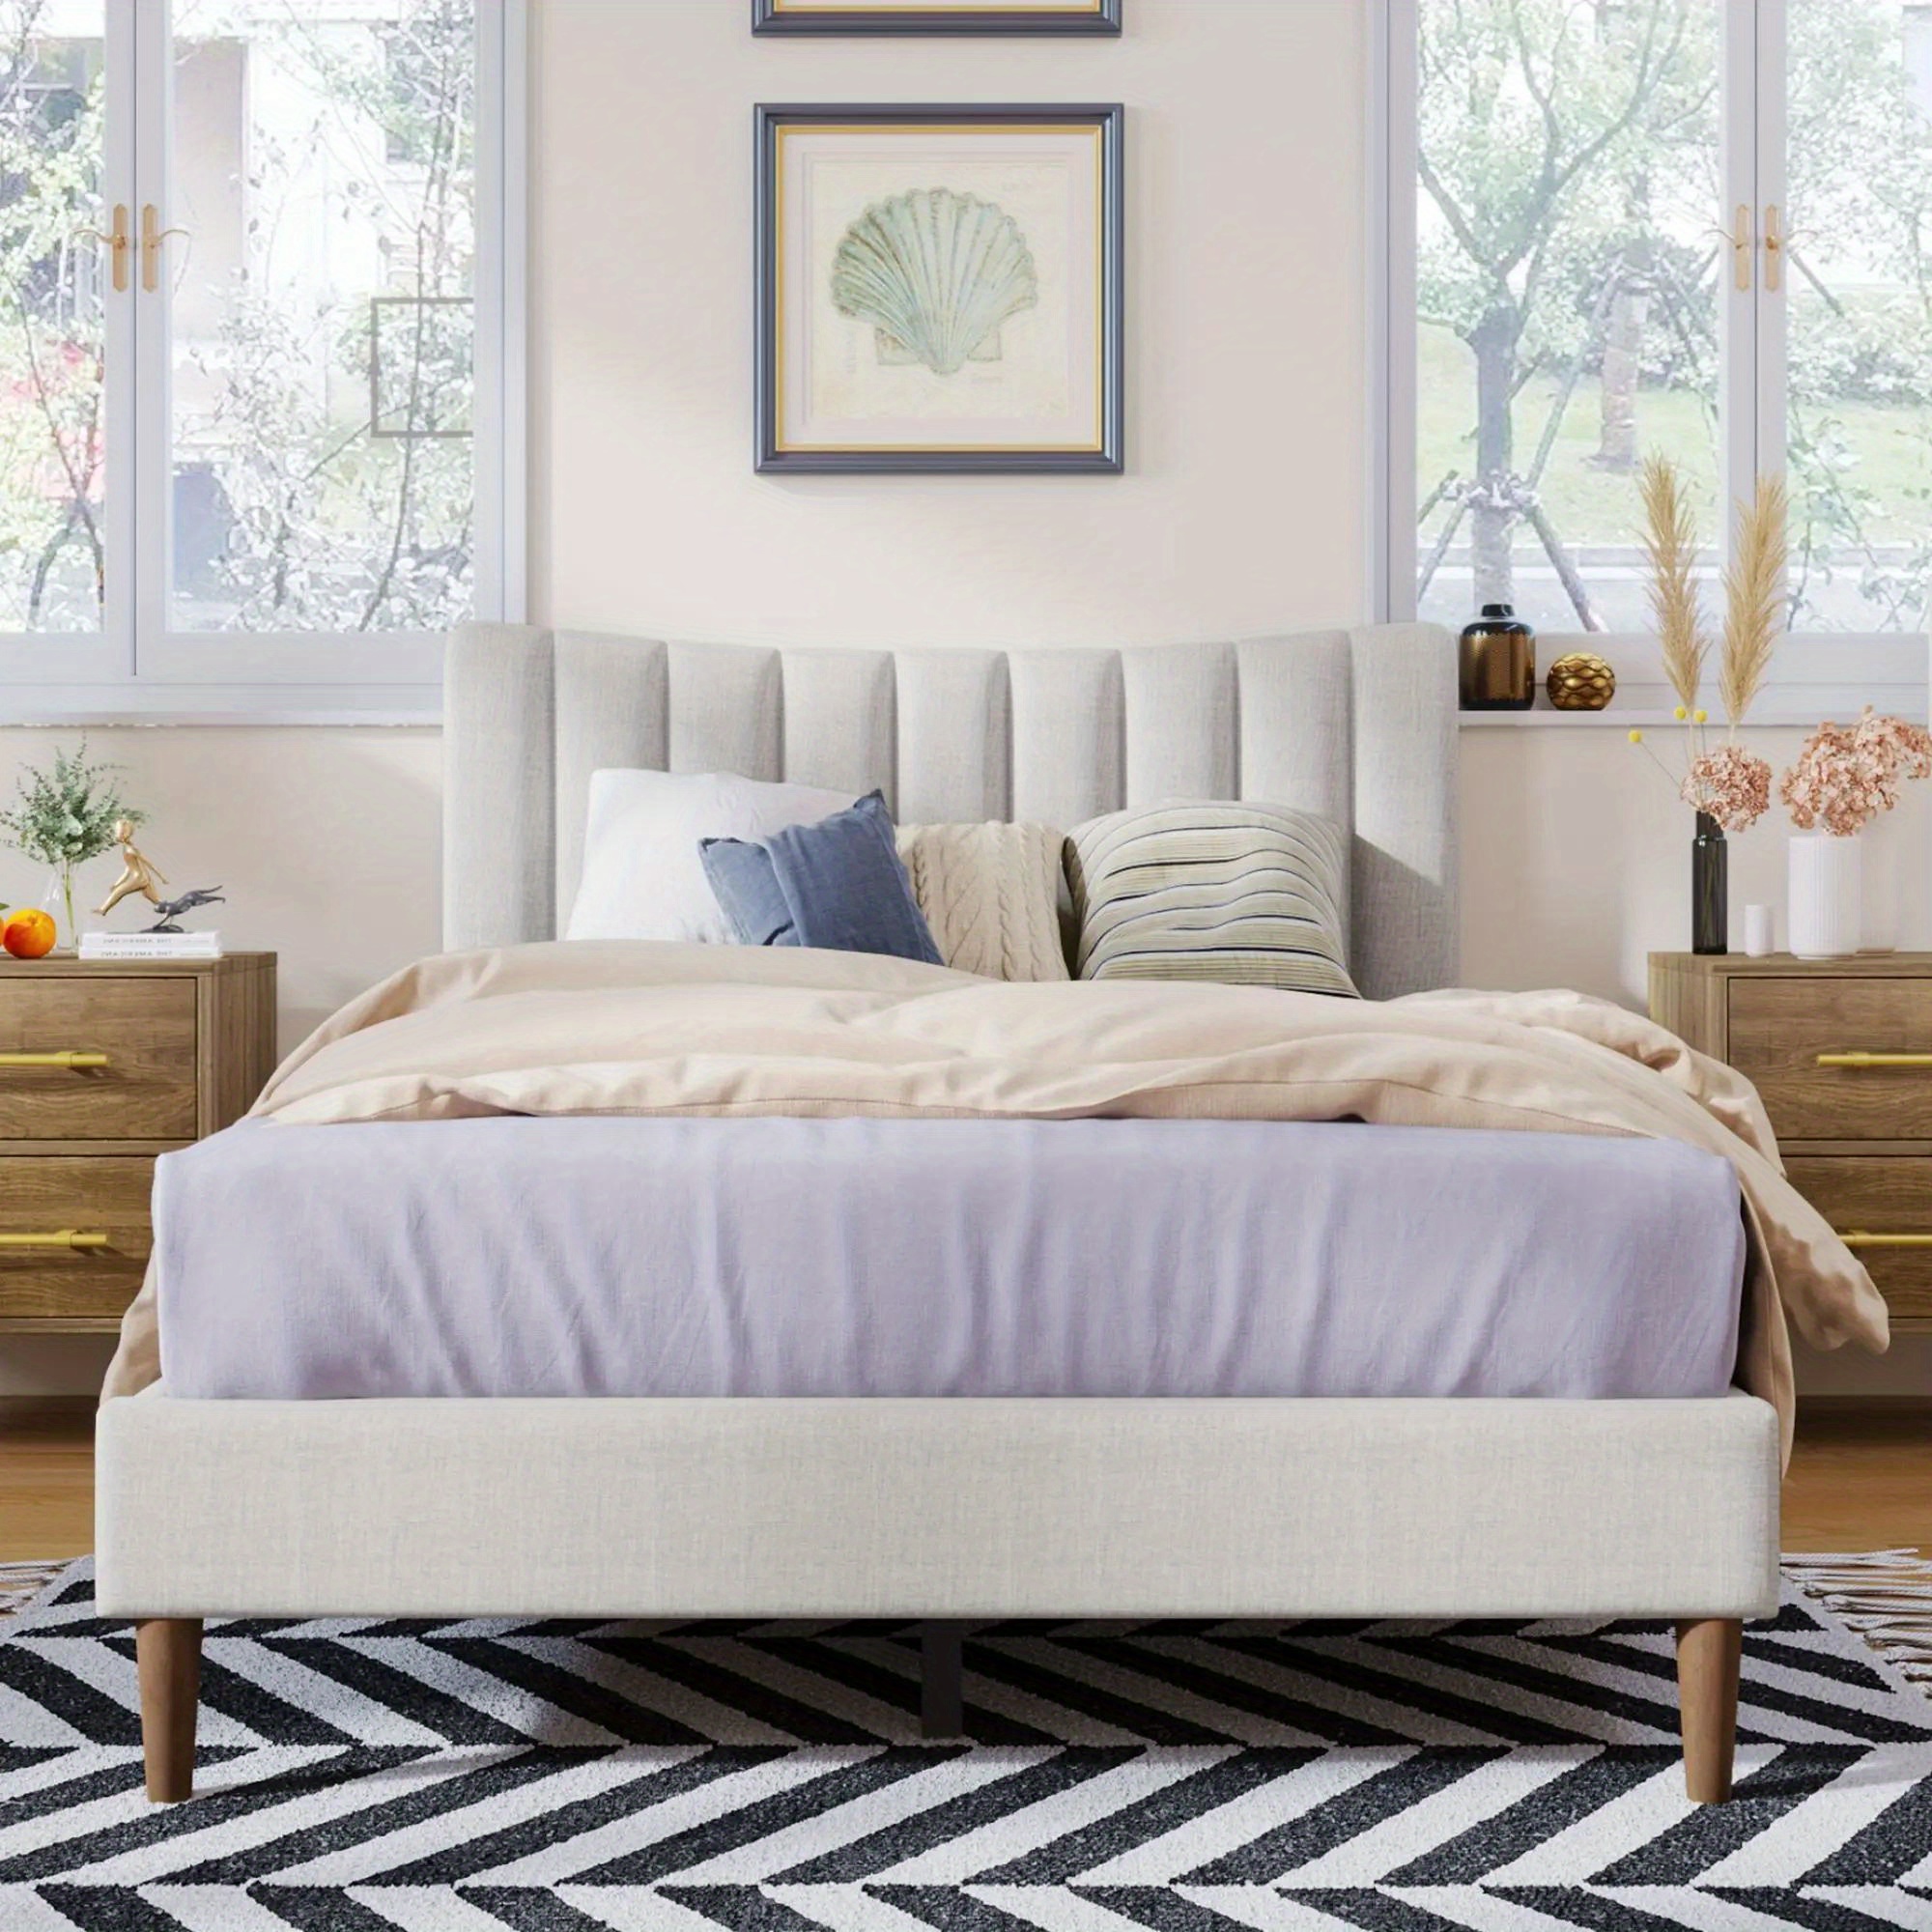 

1pc Upholstered Platform Bed Frame With Vertical Channel Tufted Headboard, No Box Spring Needed